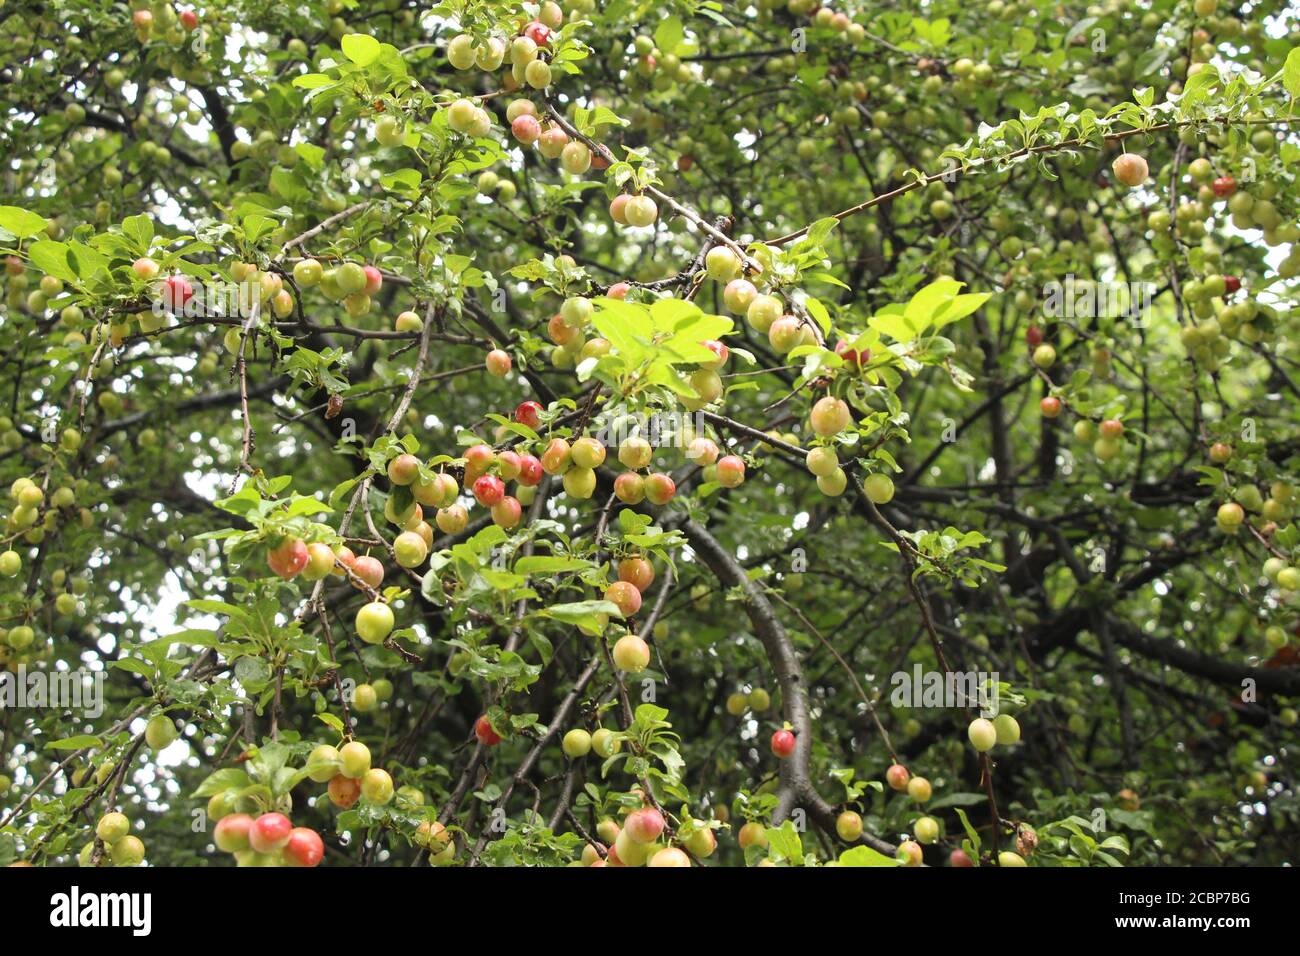 Near Pankrac in Prague, there are cherry plum trees, laden with fruits. These cherry plums are not yet ripe, but they are gradually ripening. Stock Photo